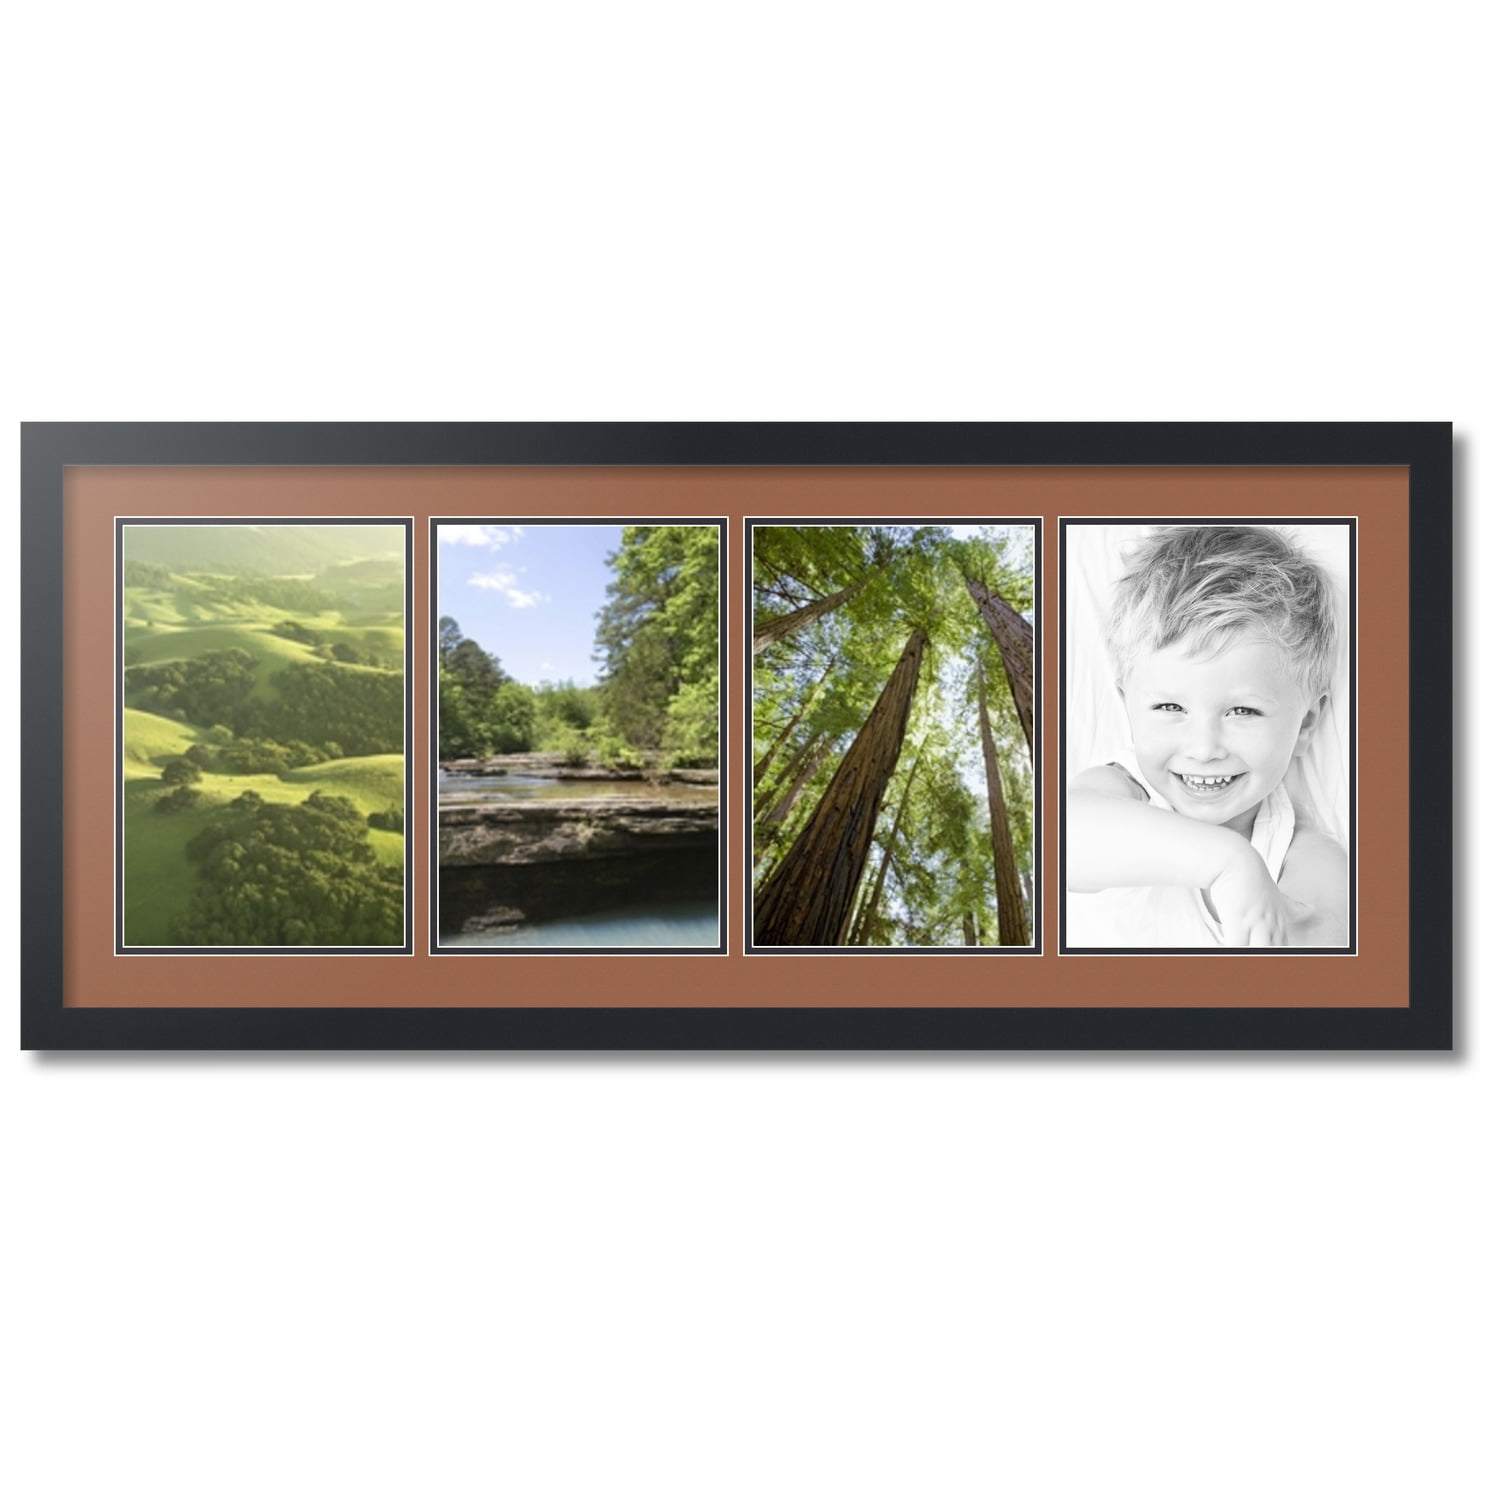 Space Art Deco, Collage Picture Frame with 4-Opening Display Four 4x6  Photos with Mat or 8x20 Without Mat, Wall Display Horizontal or Vertical,  High